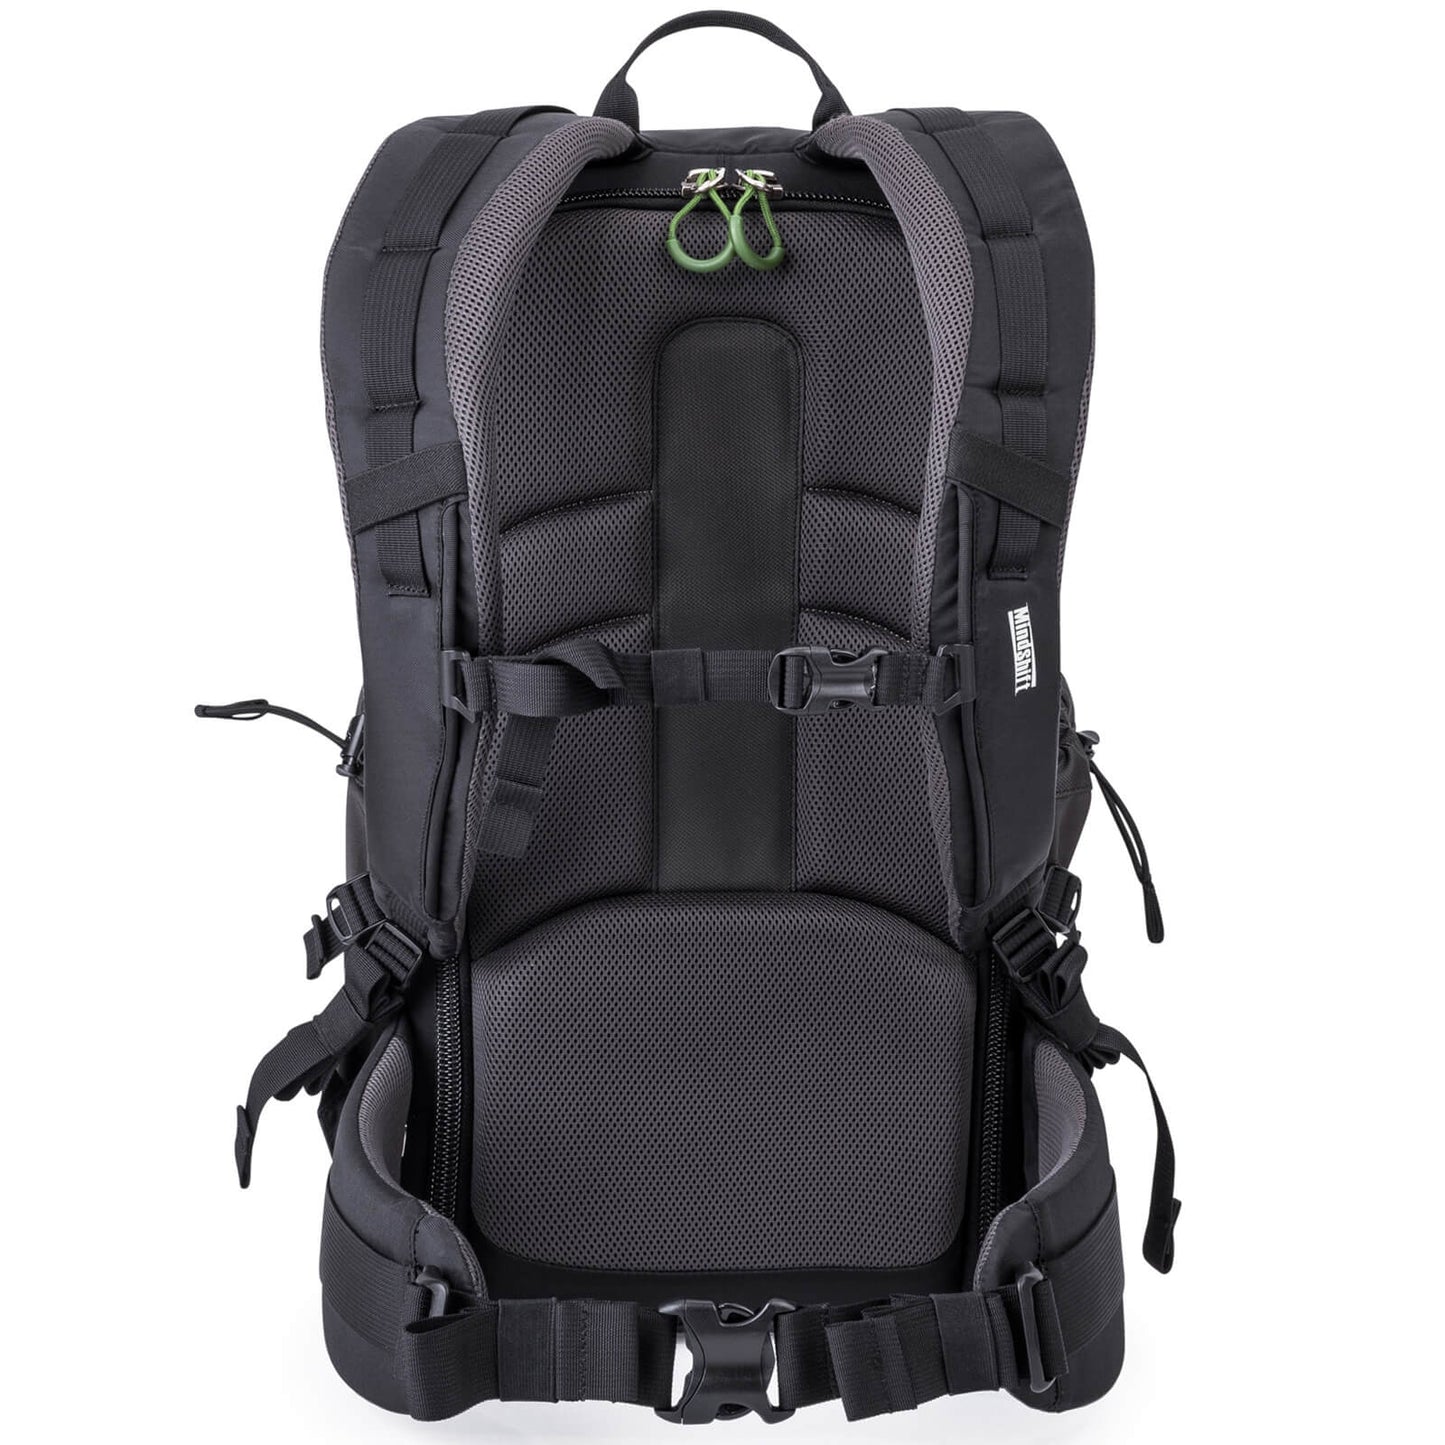 BackLight 26L Best Full-featured Back-loading Outdoor Camera